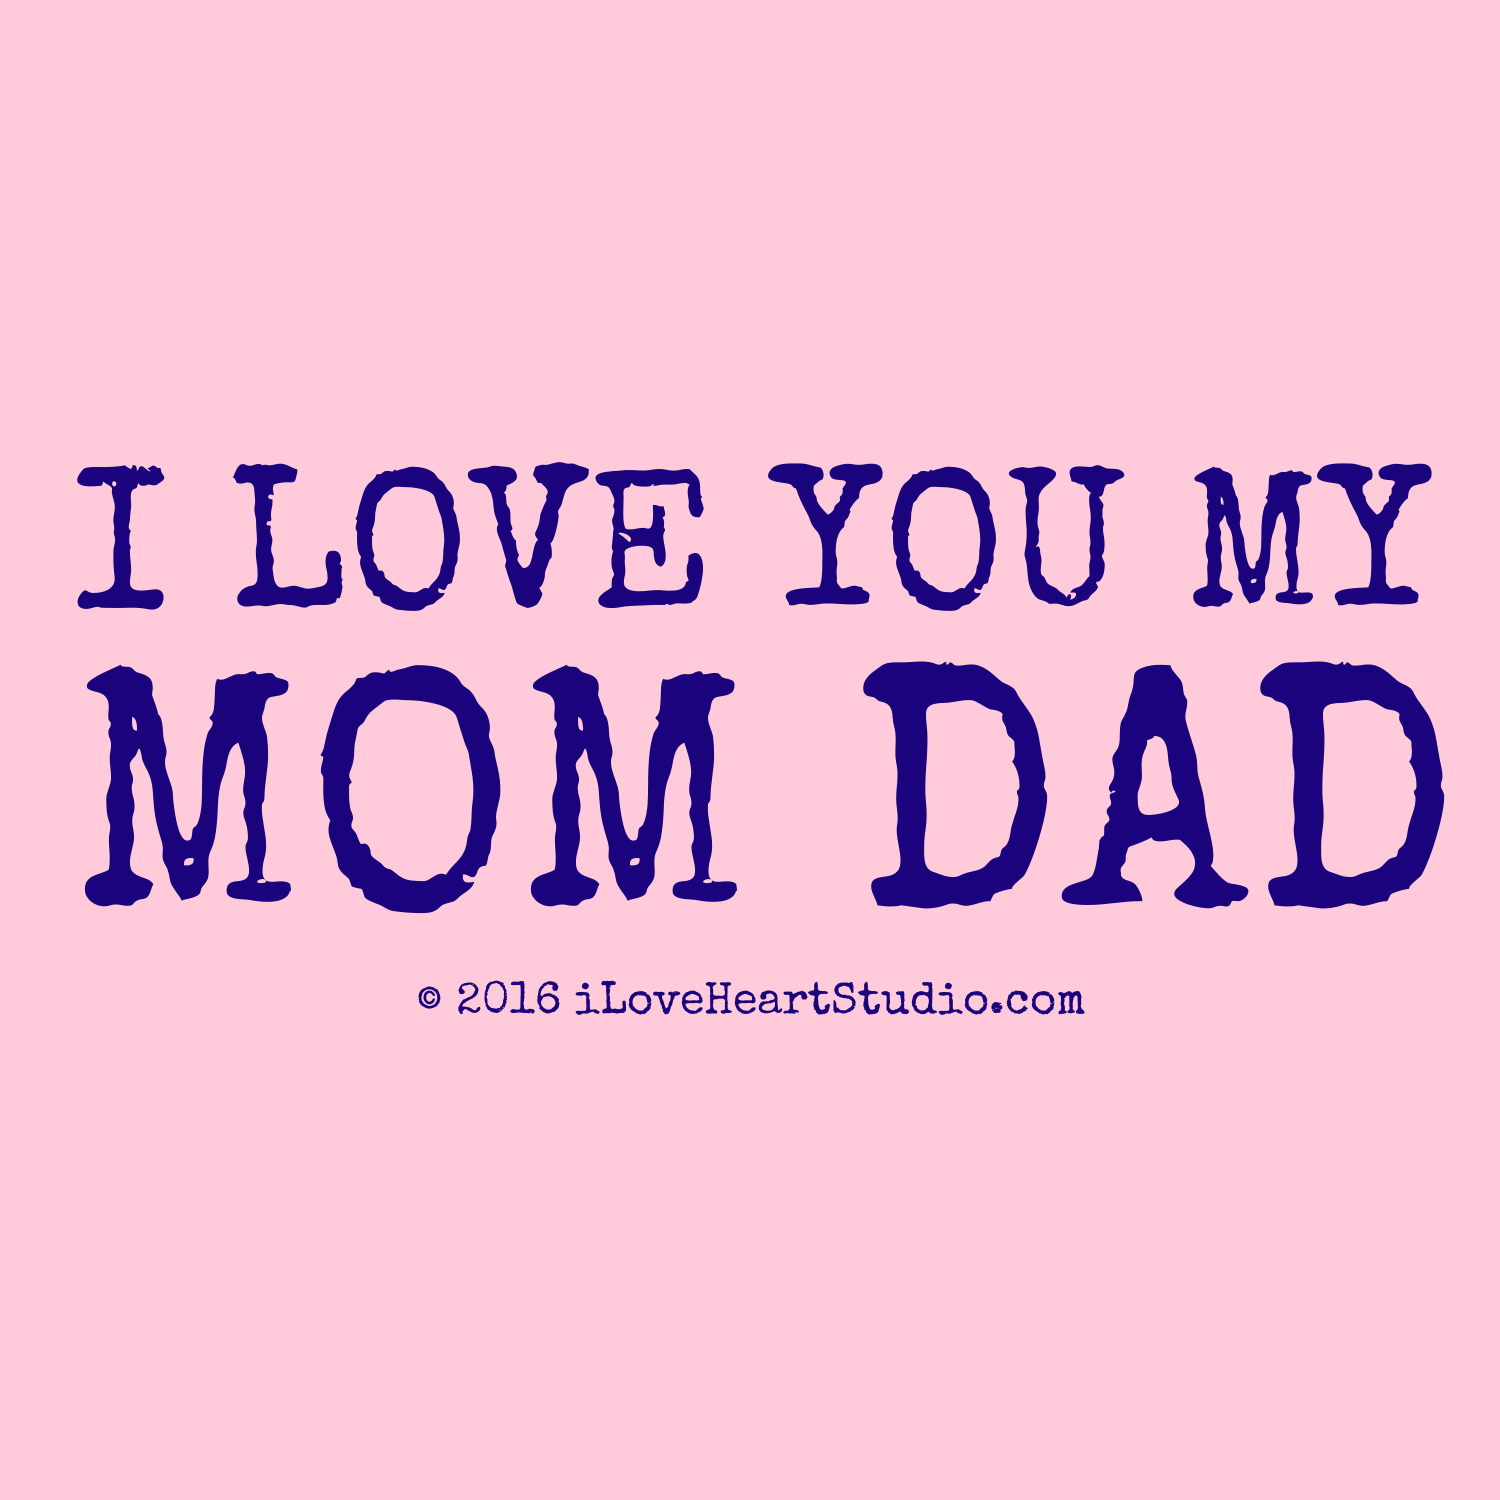 I Love My Mom And Dad Wallpaper, image collections of wallpaper